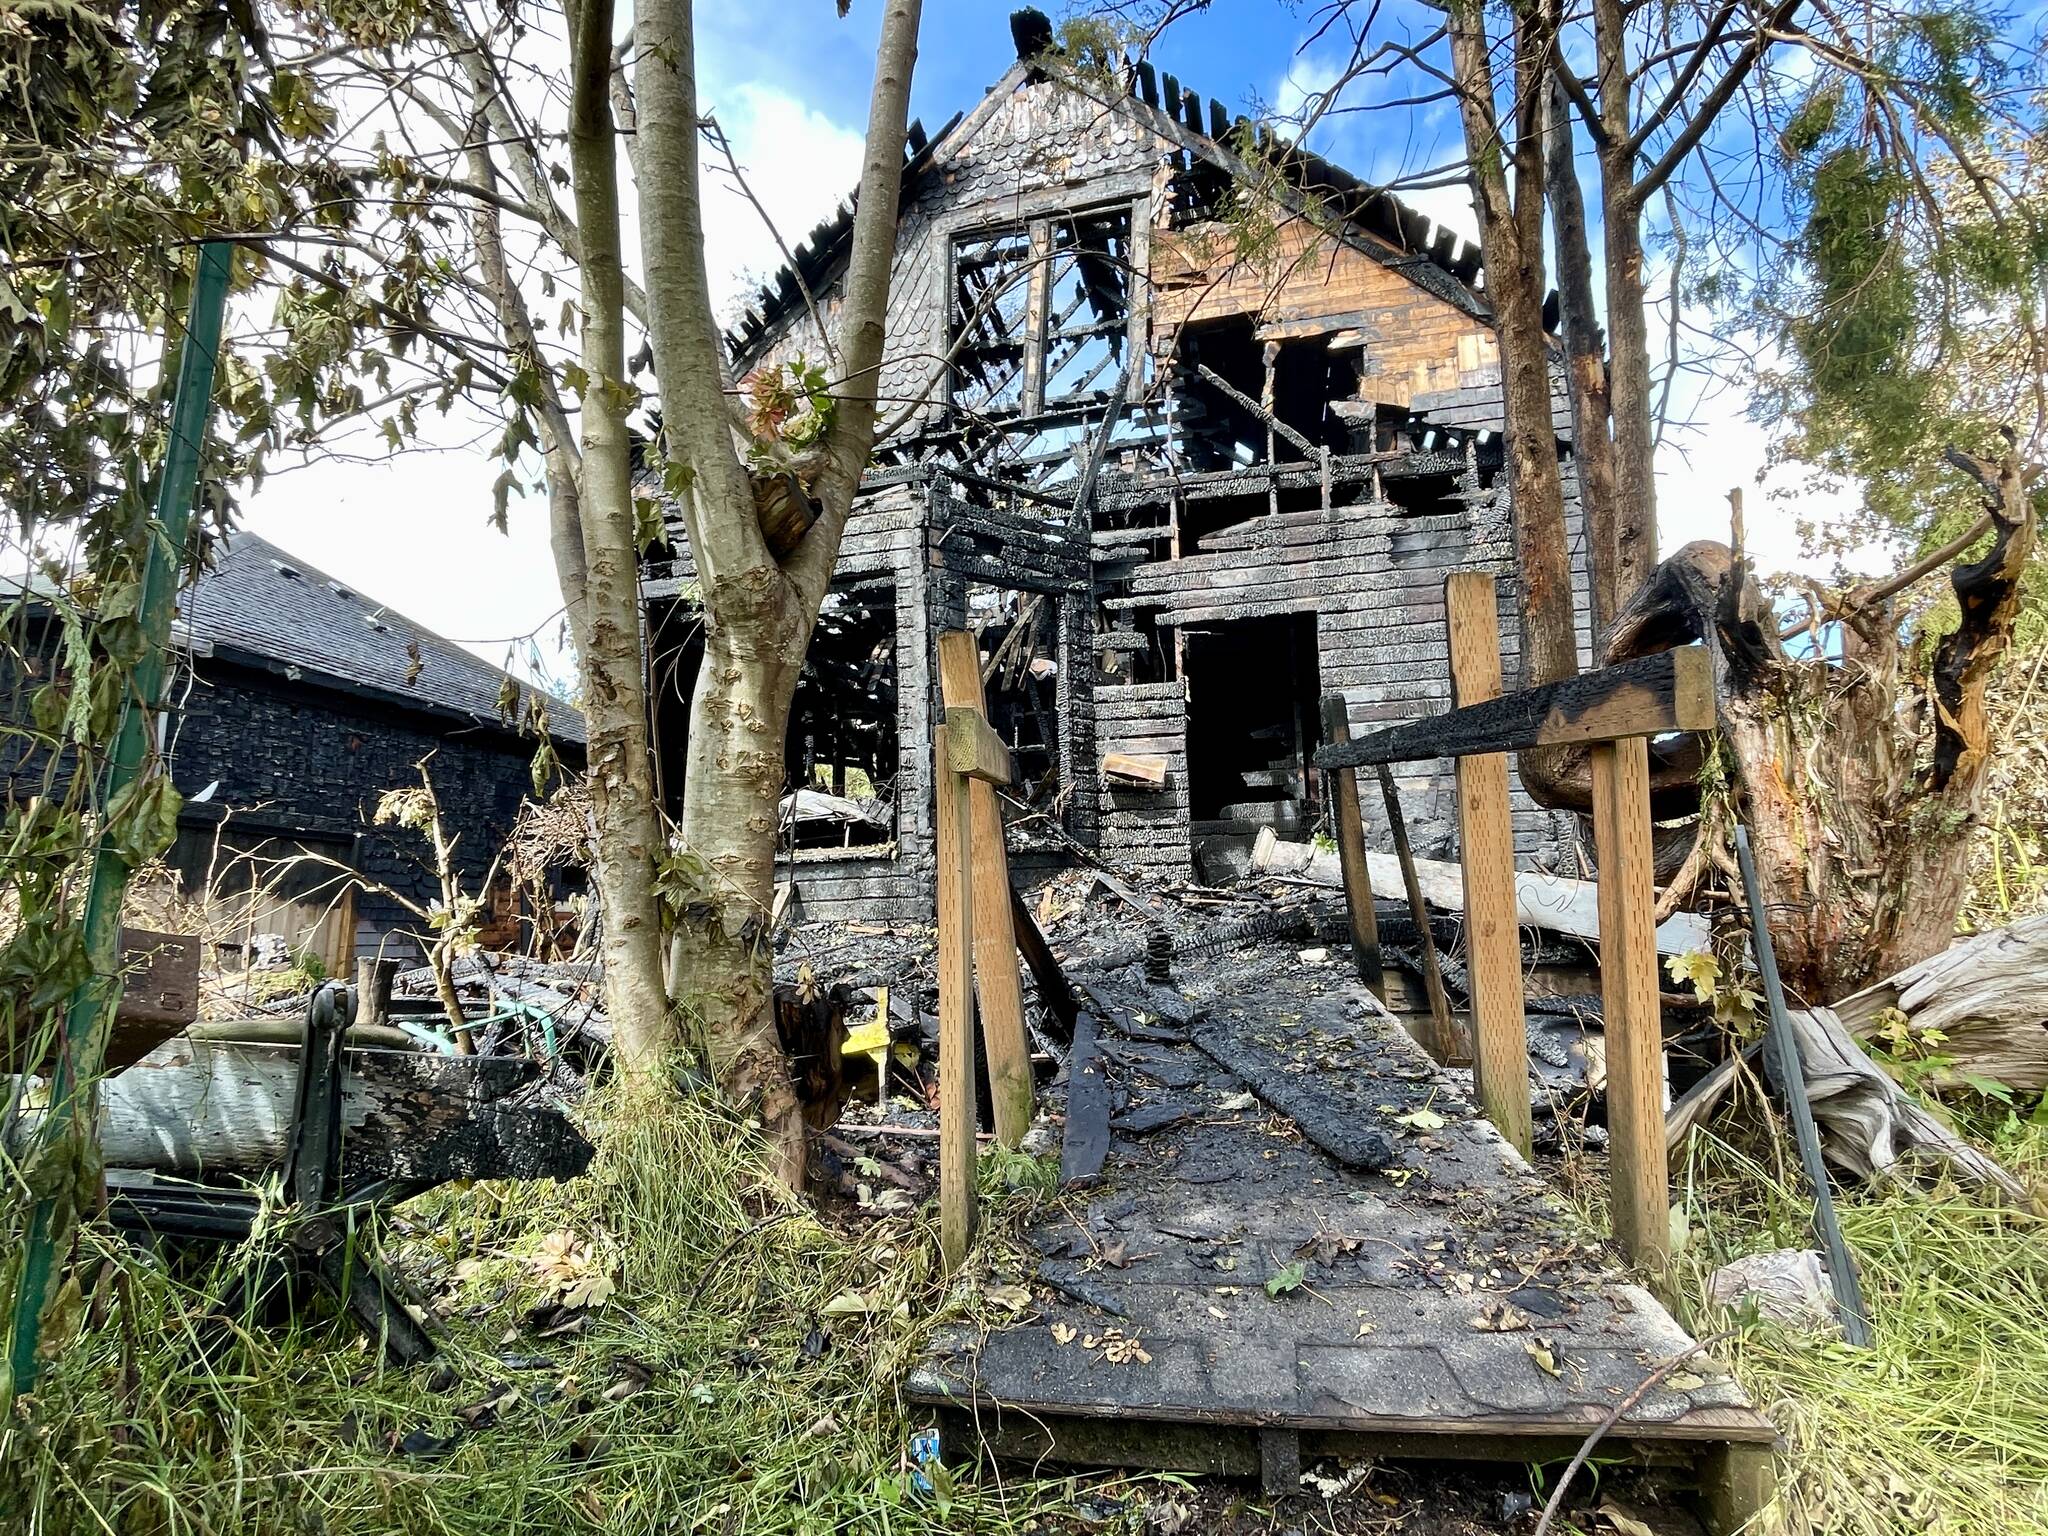 A vacant house in Hoquiam was destroyed Sunday night in a fire that damaged a neighboring house. (Michael S. Lockett / The Daily World)